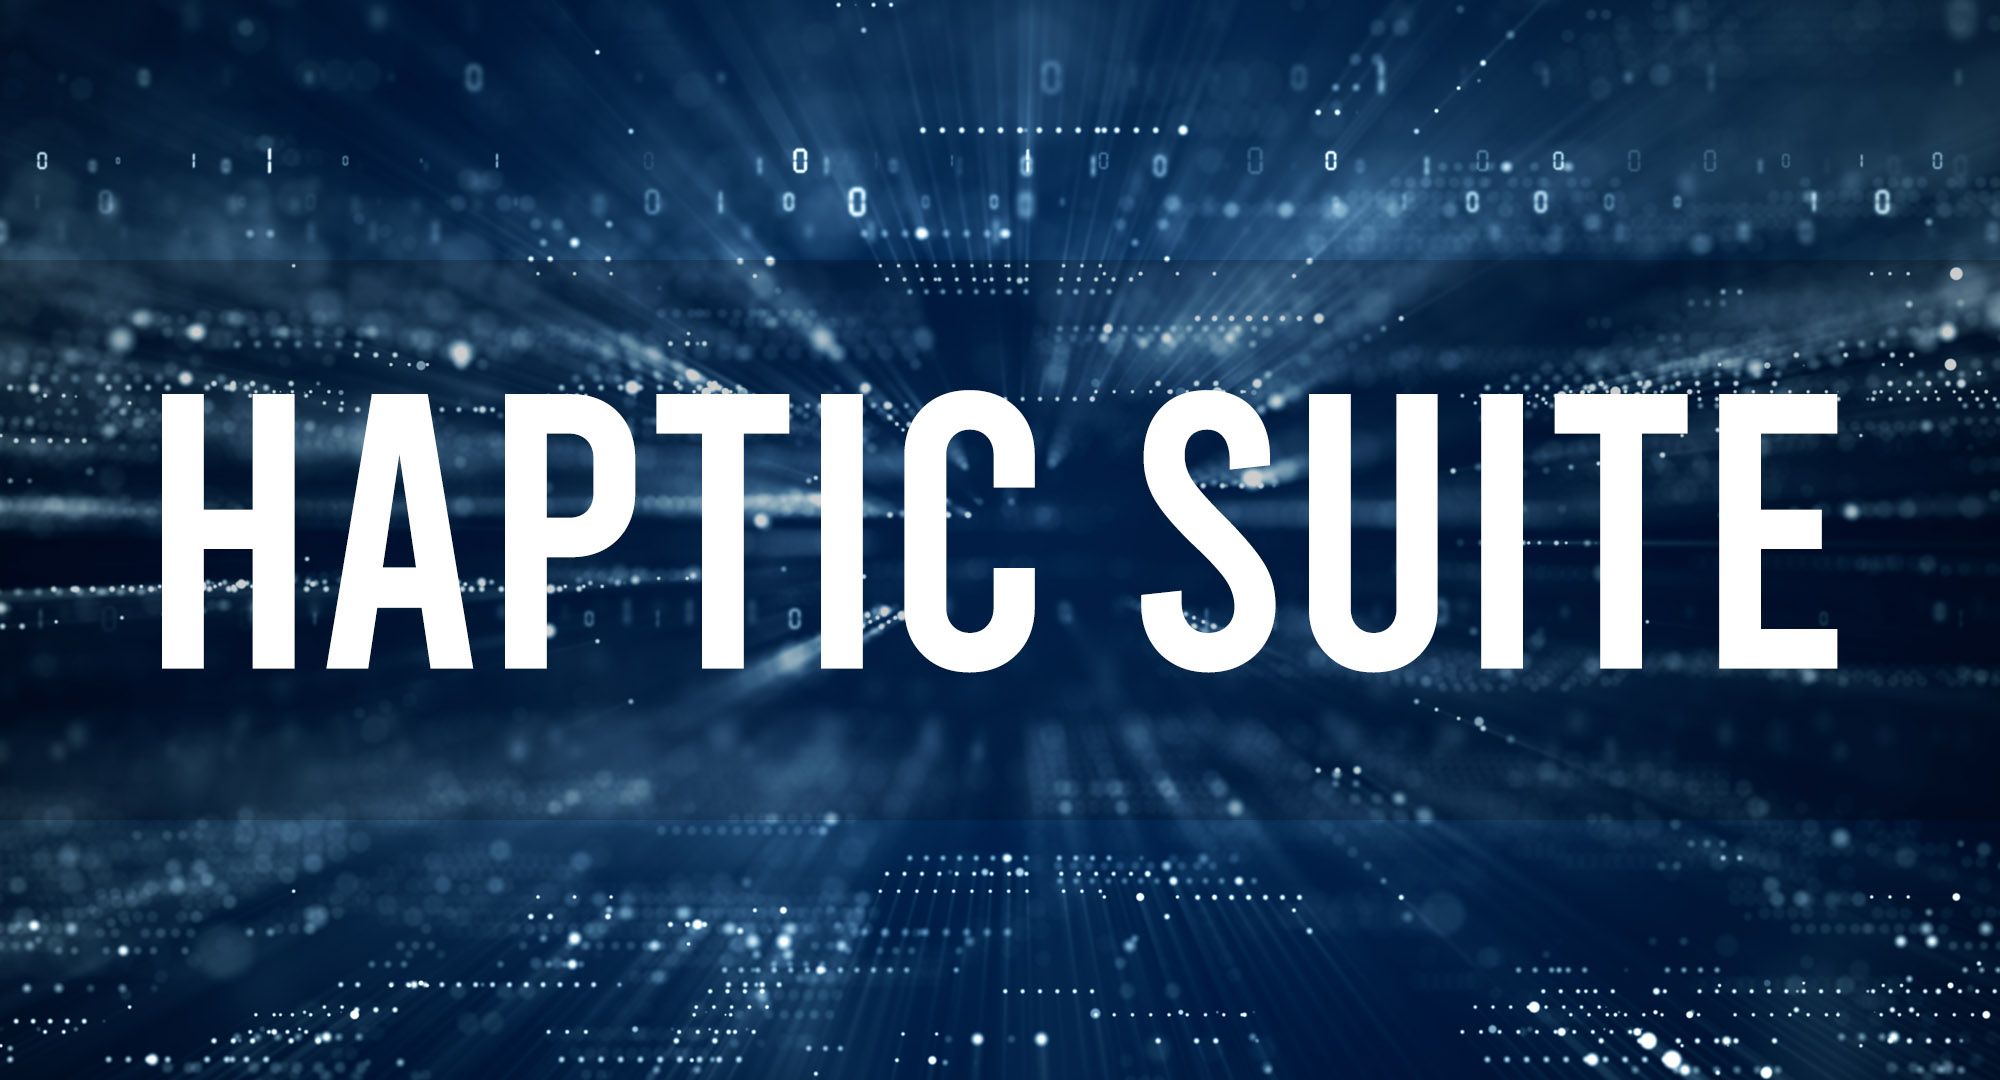 What is a Haptic Suite